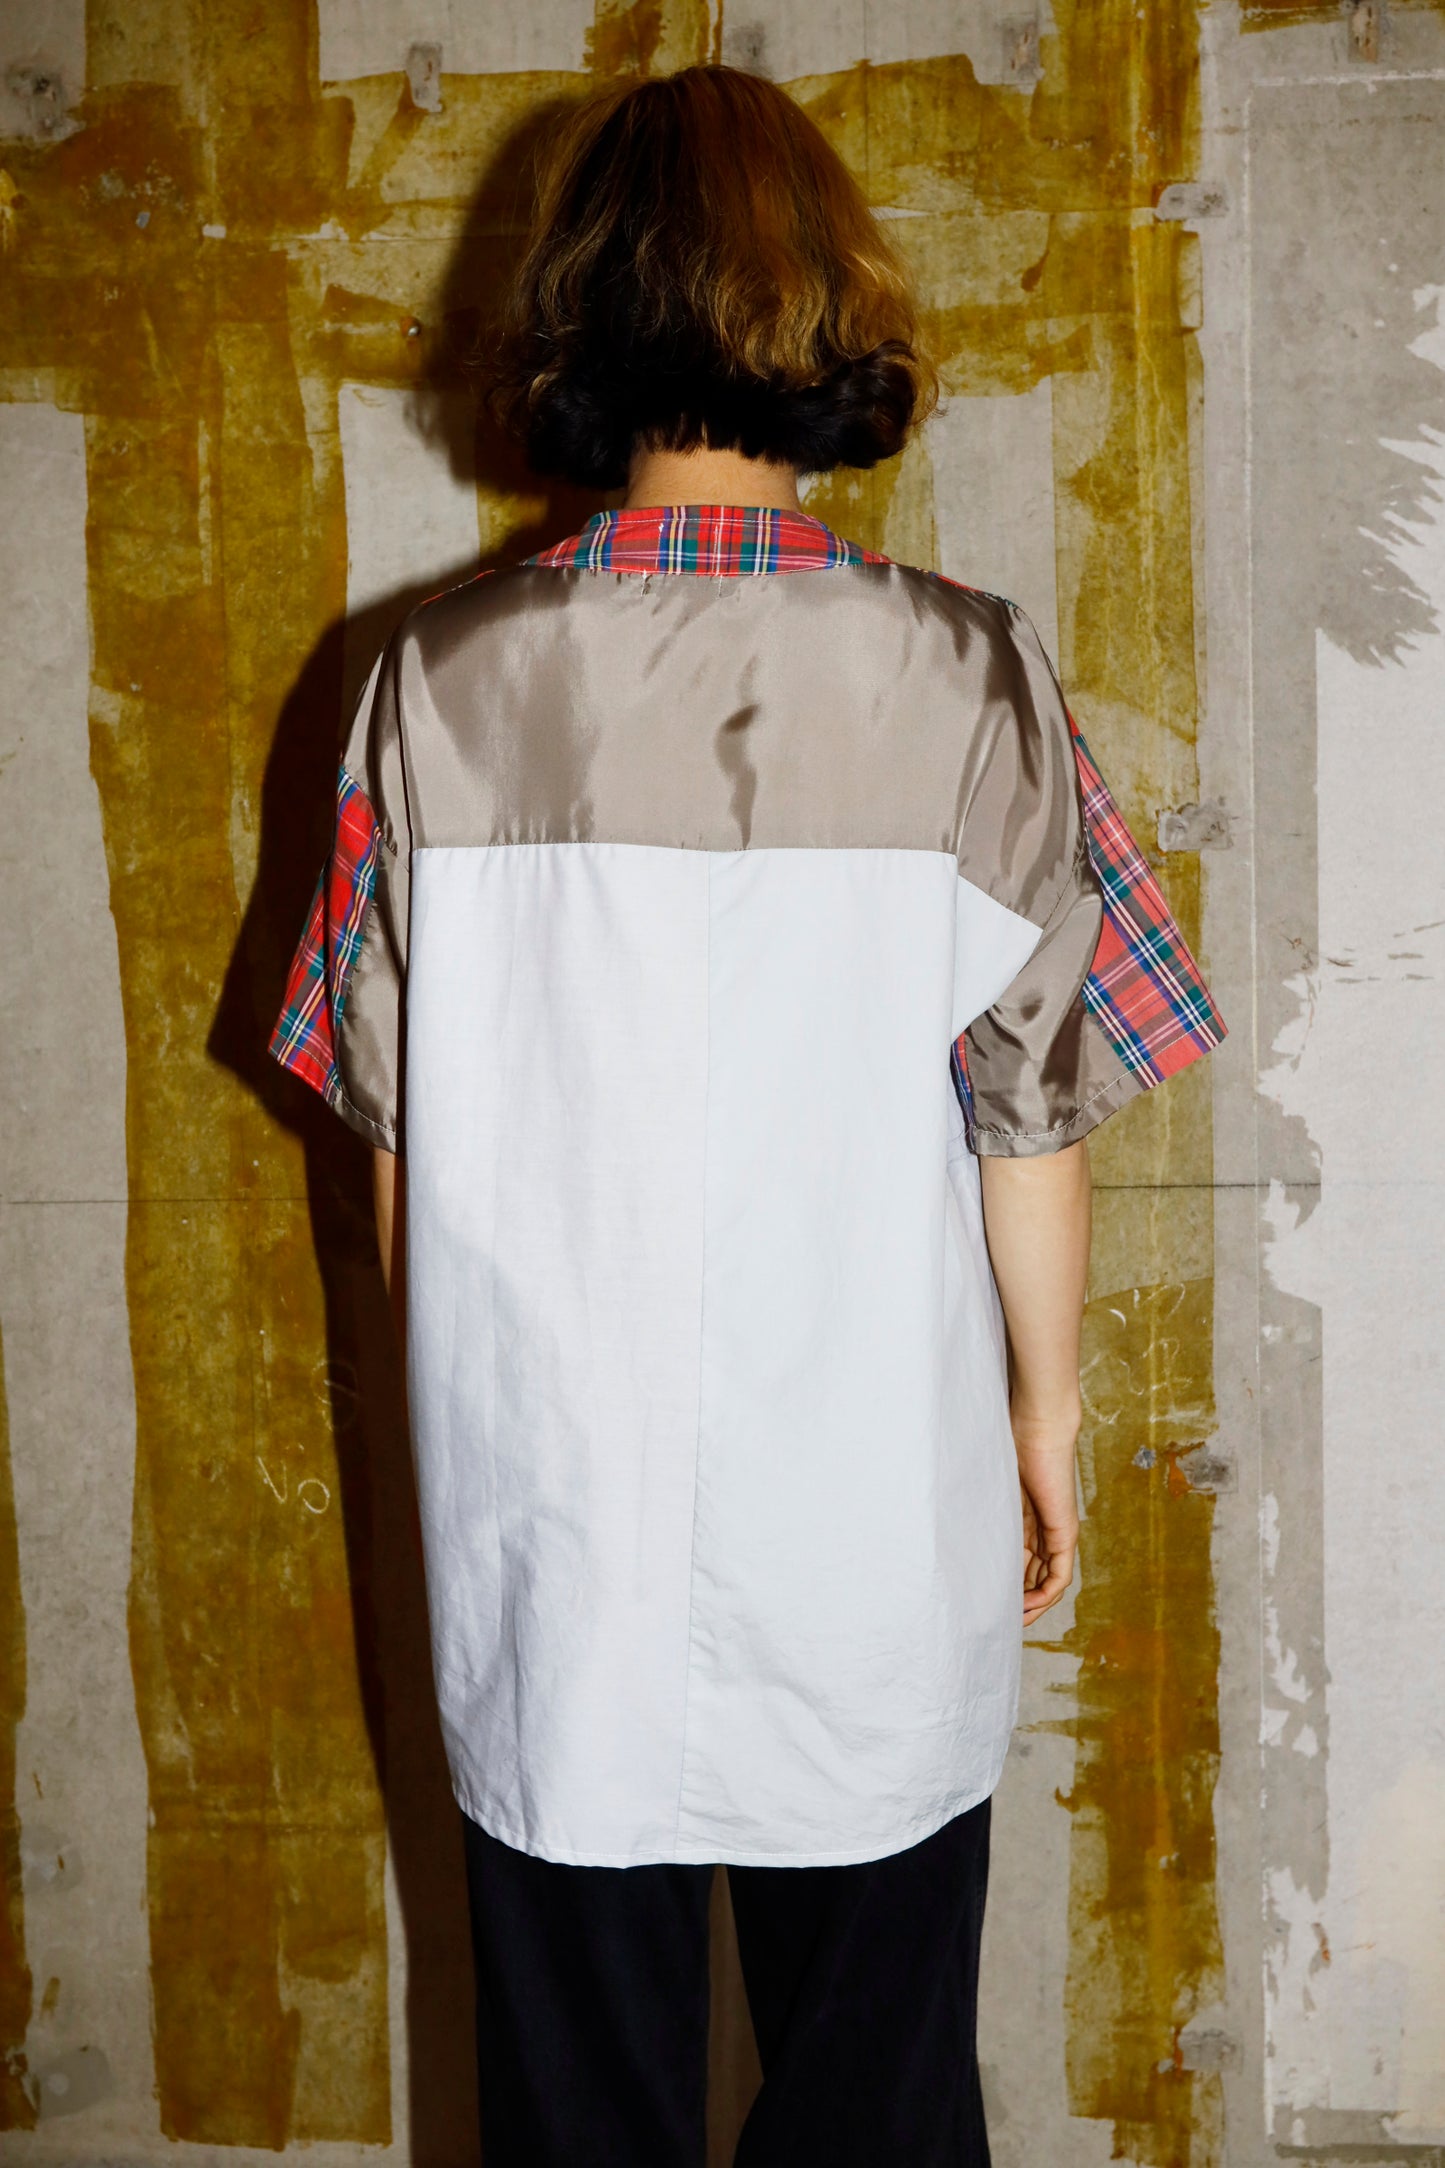 POTTOxUDW UP-CYCLED GRADATION BLEACHED ONE-PIECE DRESS/SHIRTS